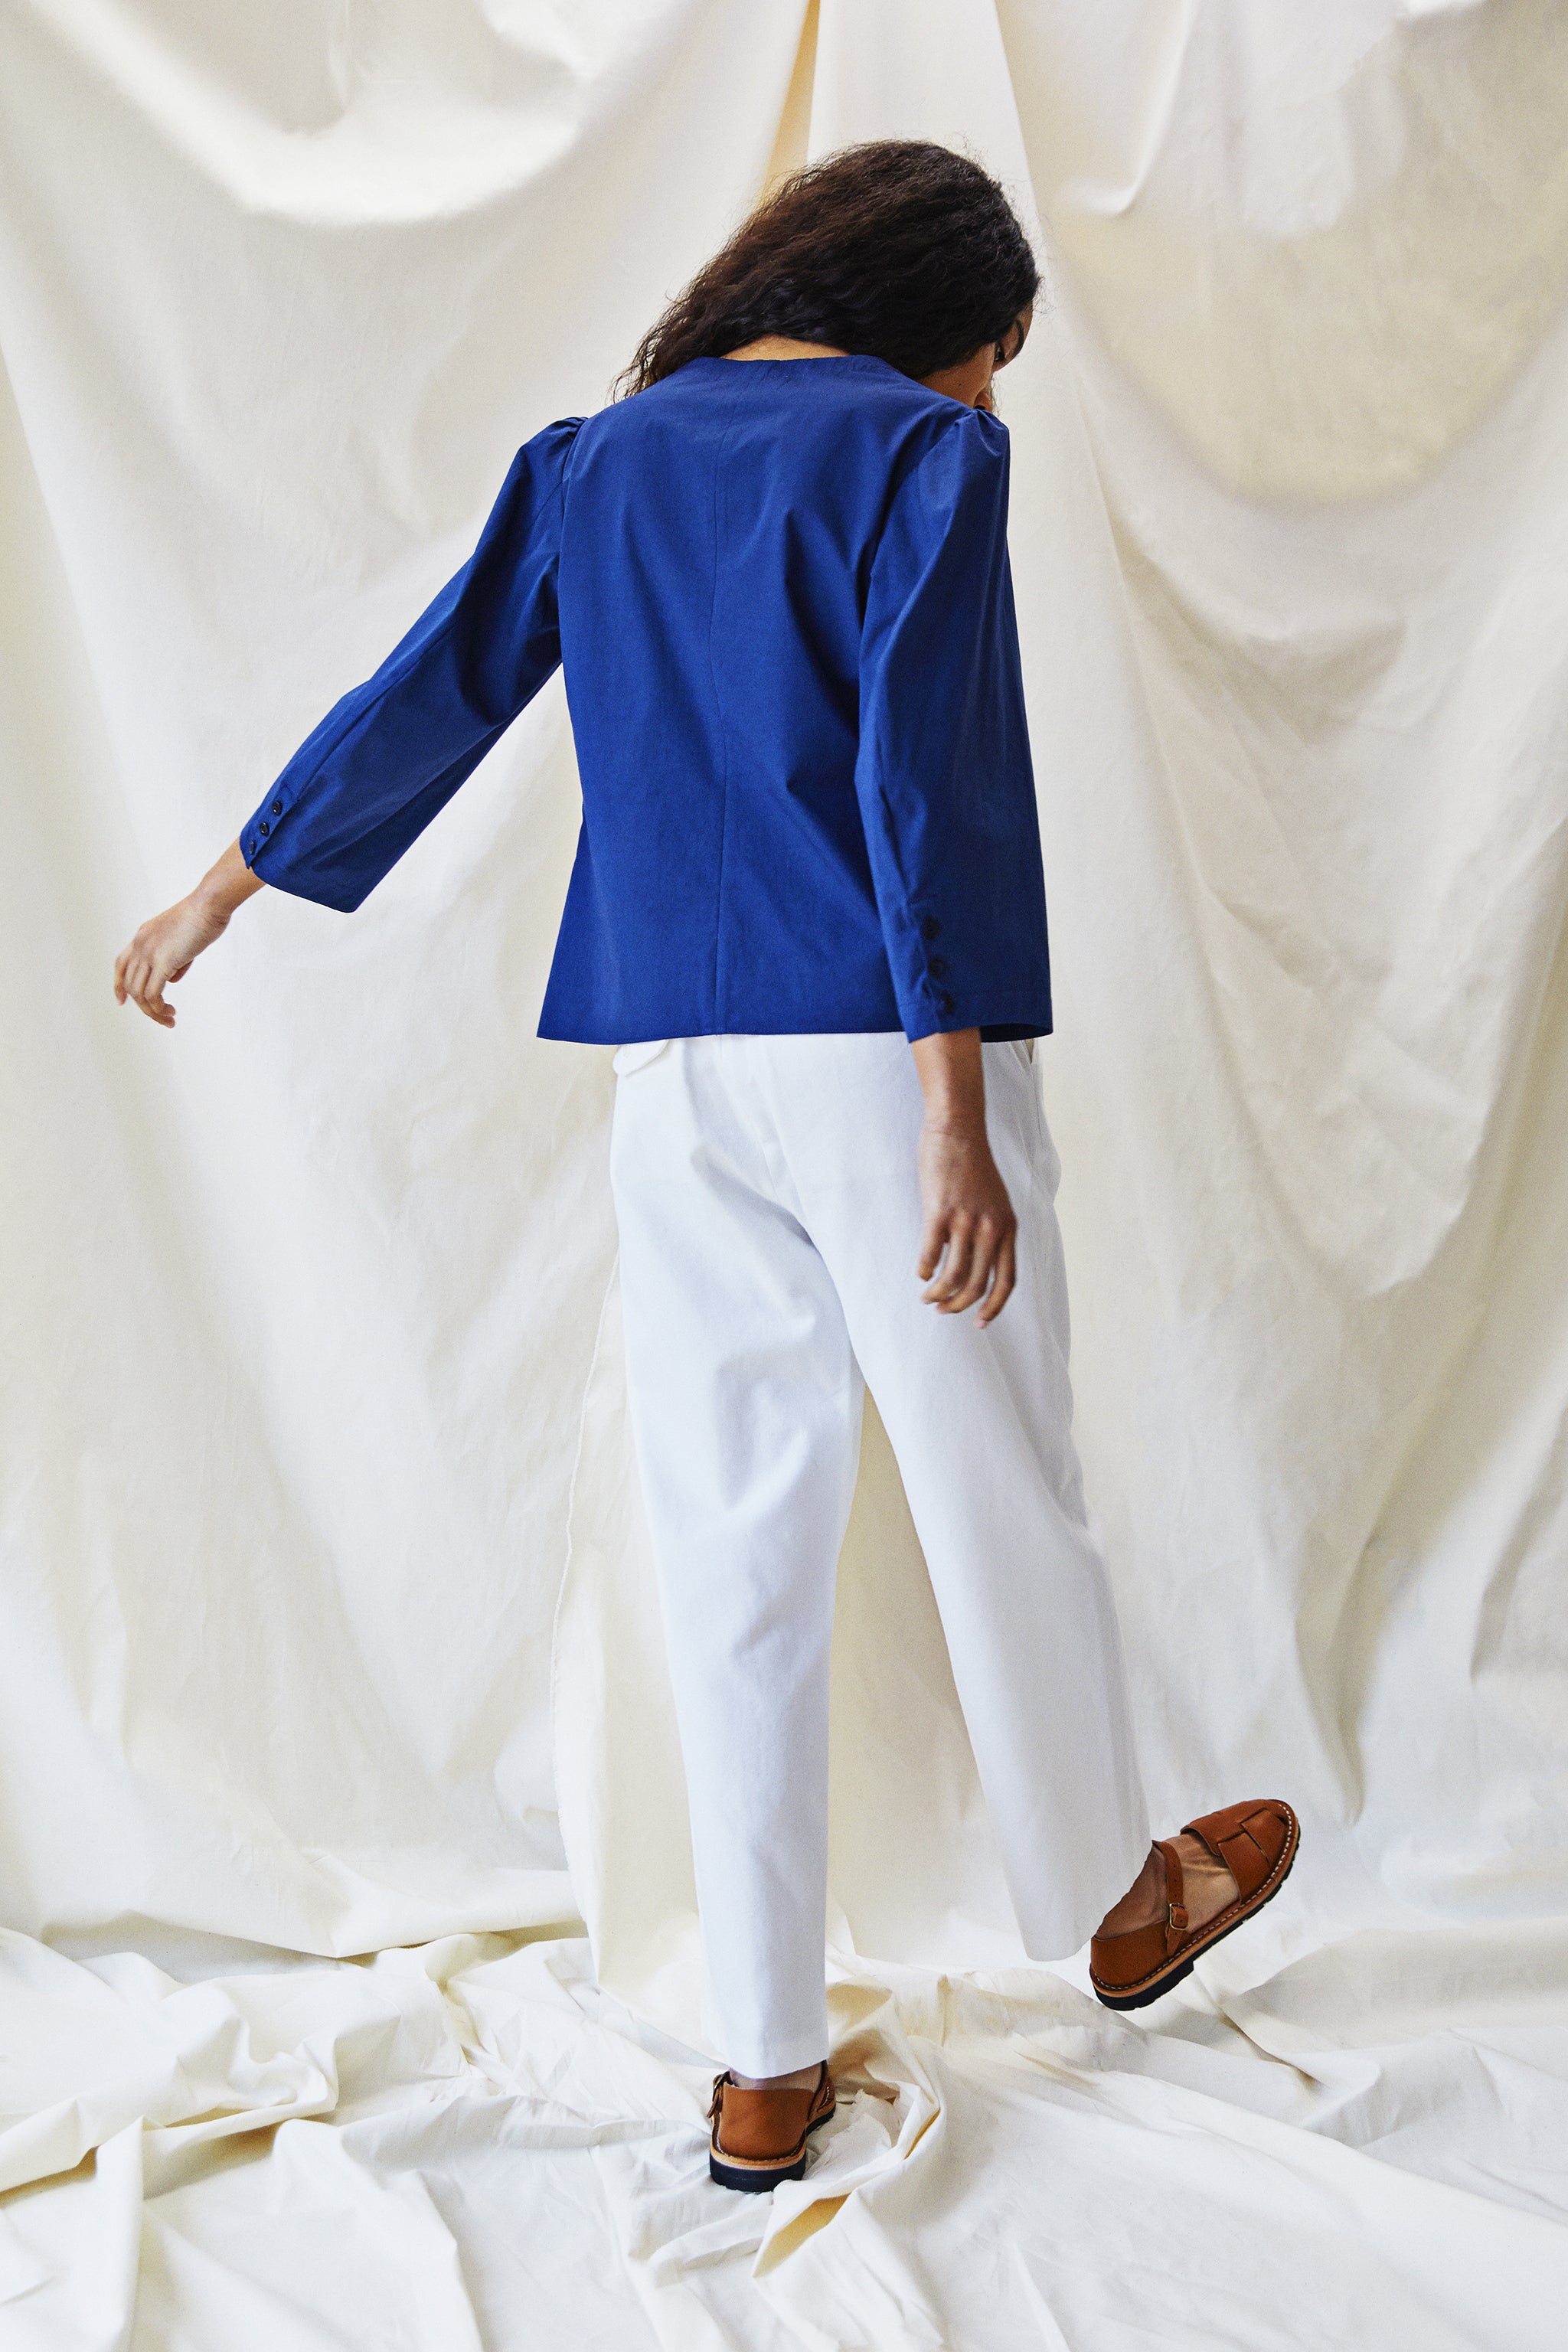 Harlow Shirt - Sapphire Blue - Alice Early